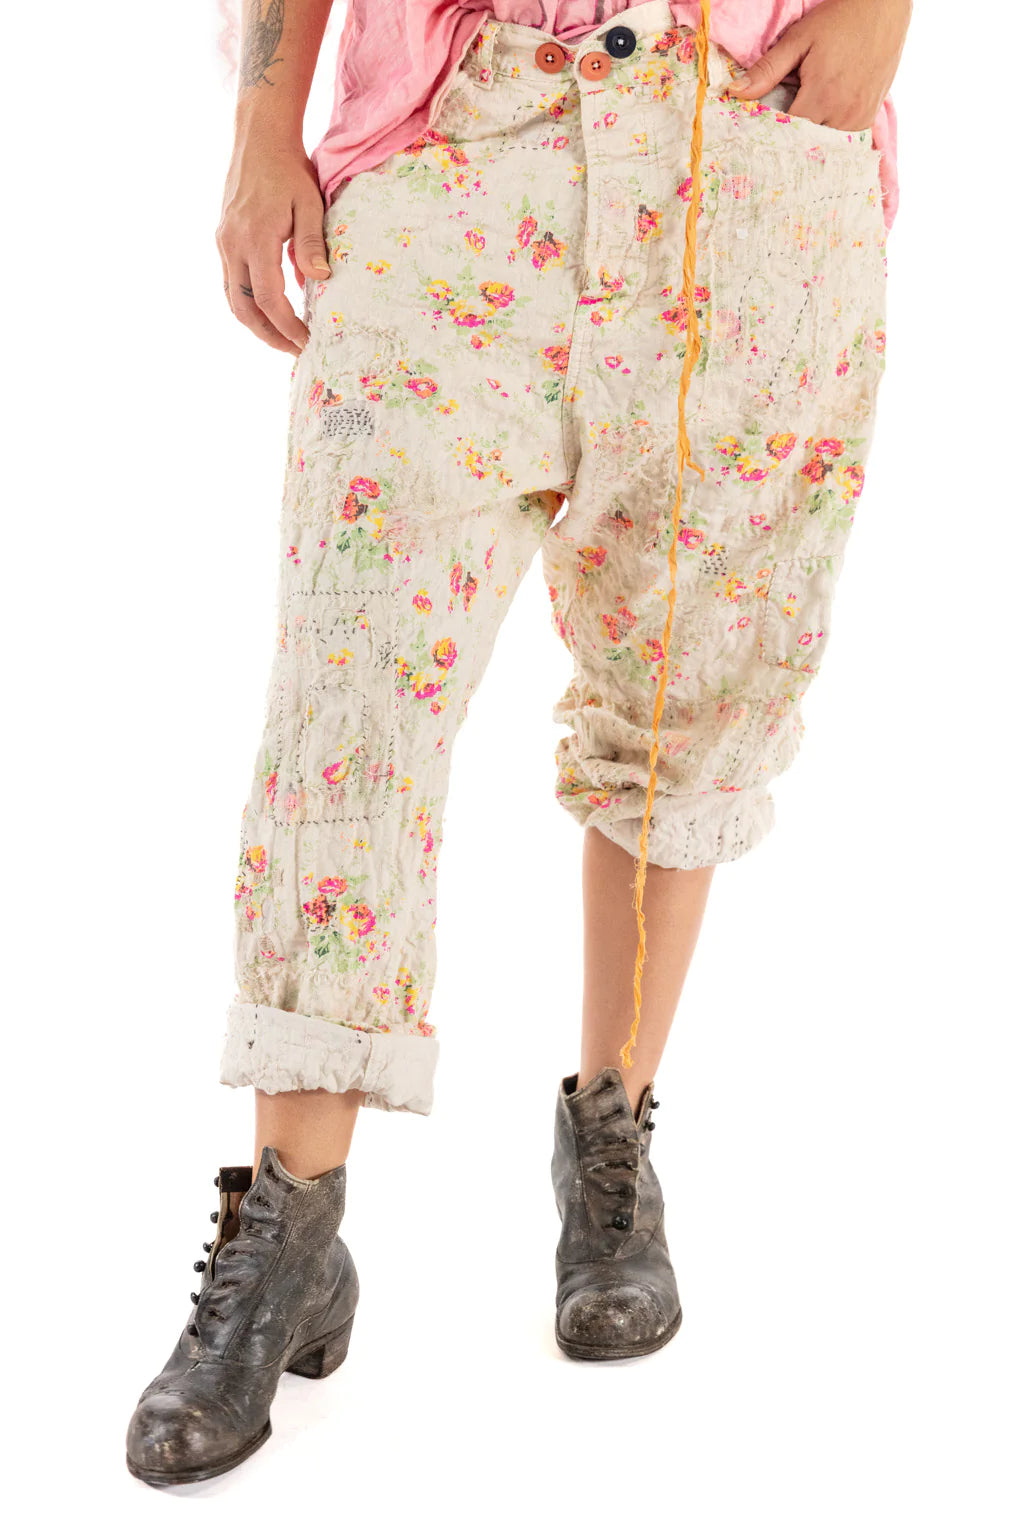 Magnolia Pearl - Cotton Linen Miner Pants in circus rose